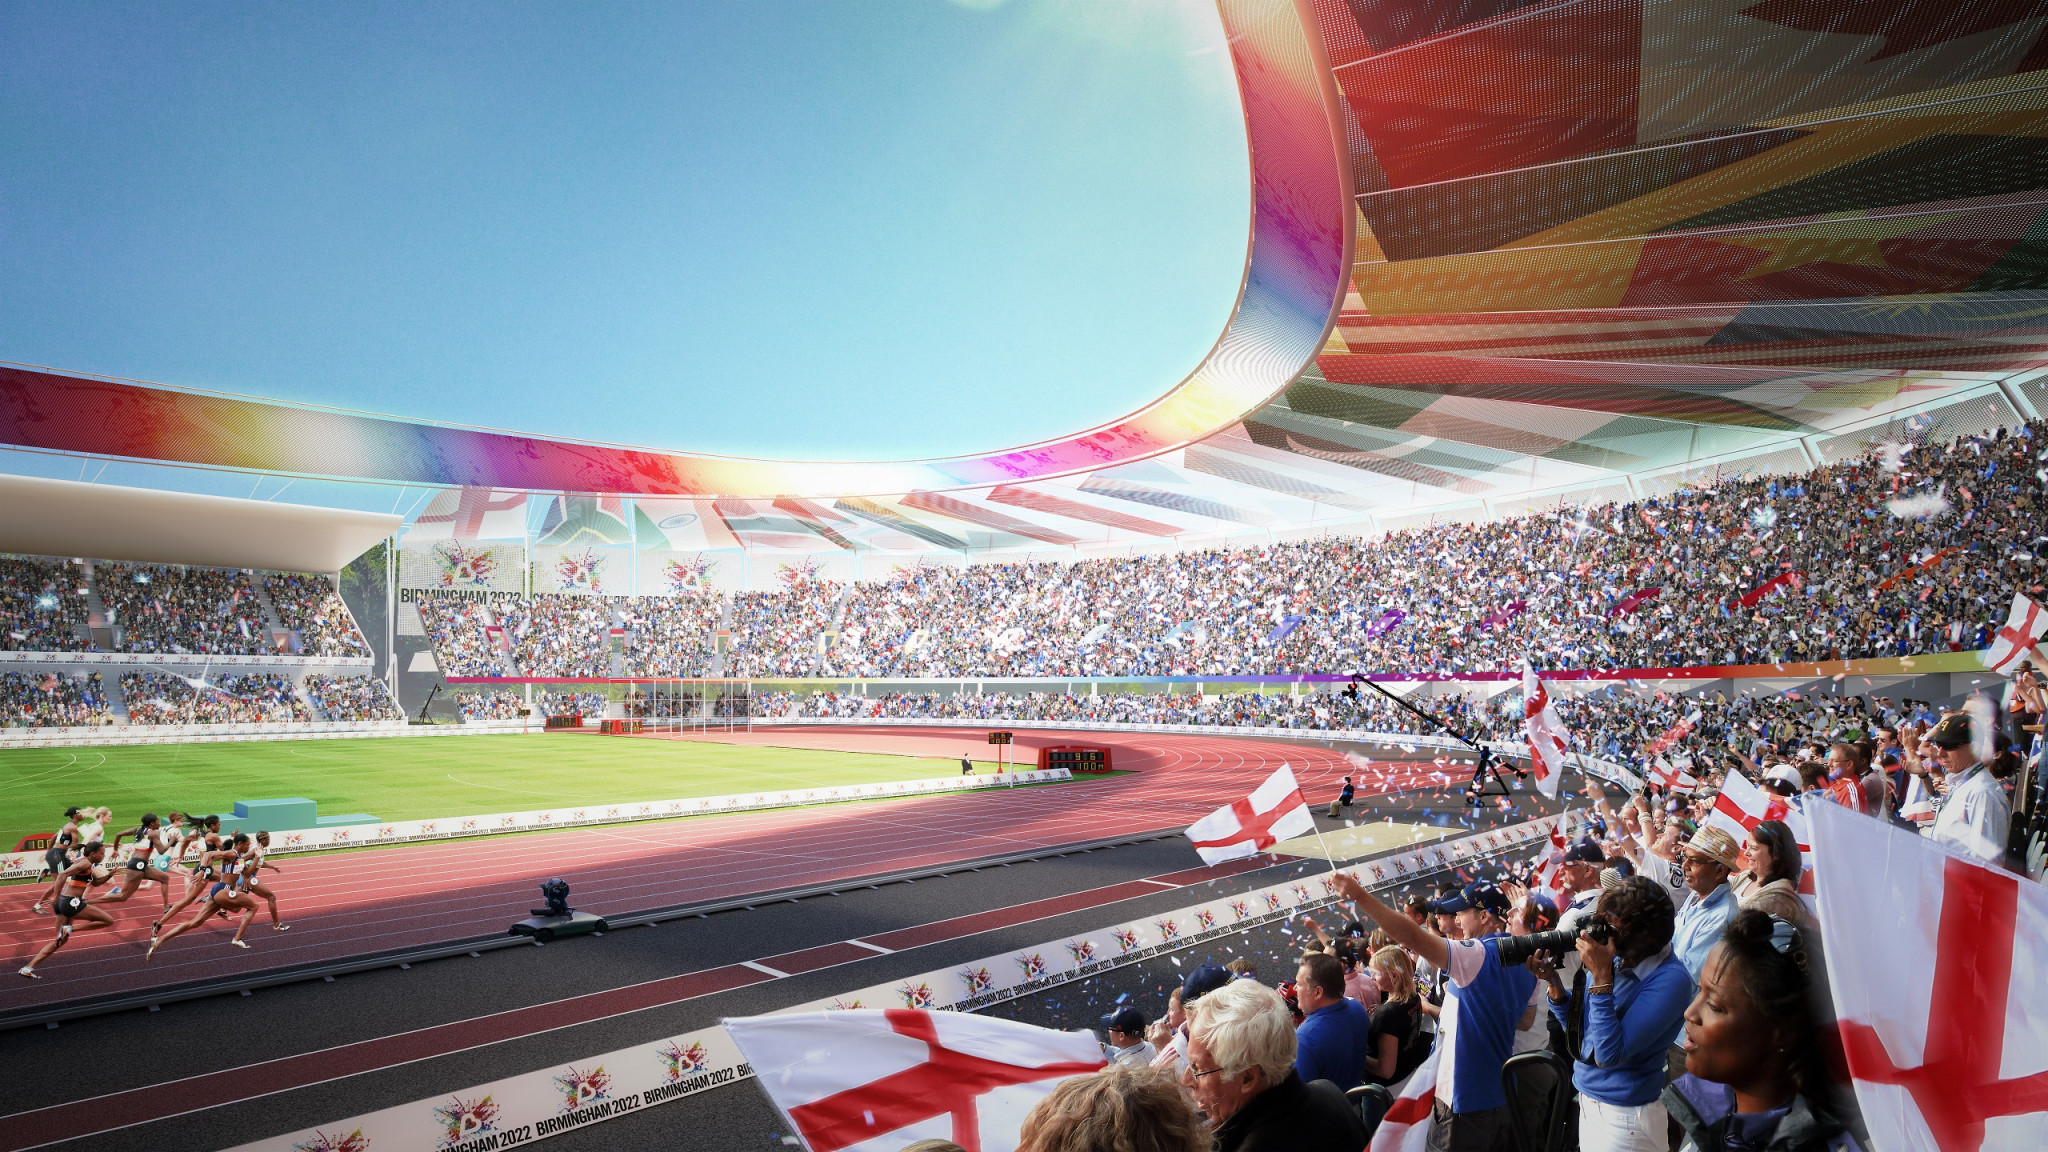 The plan by Birmingham 2022 to pay the real living wage has been welcomed by local workers ©Birmingham 2022